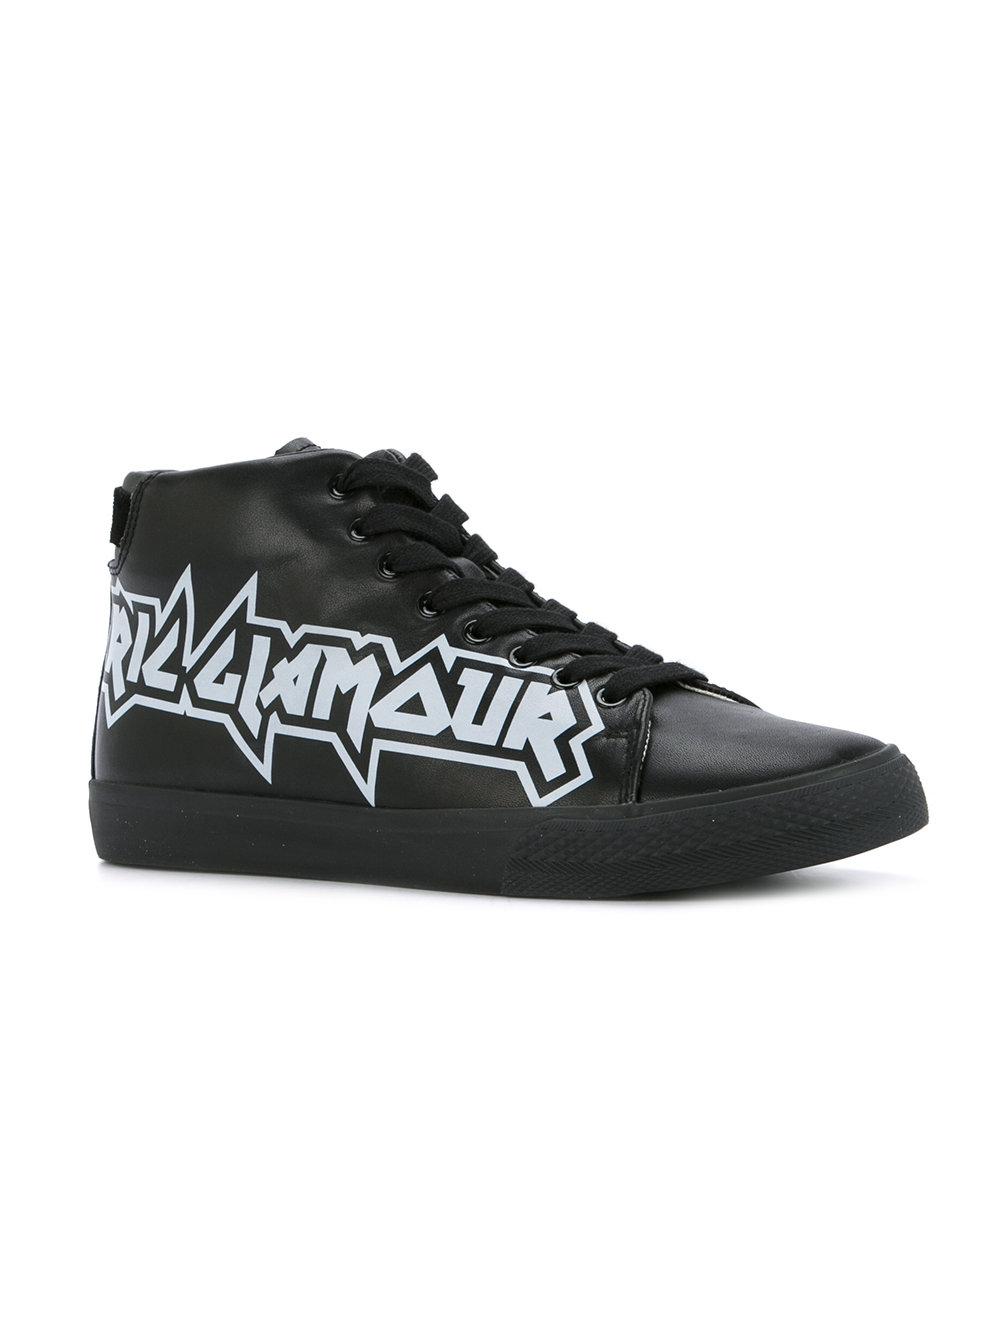 Hysteric Glamour Leather Logo Hi-top Sneakers in Black for Men - Lyst